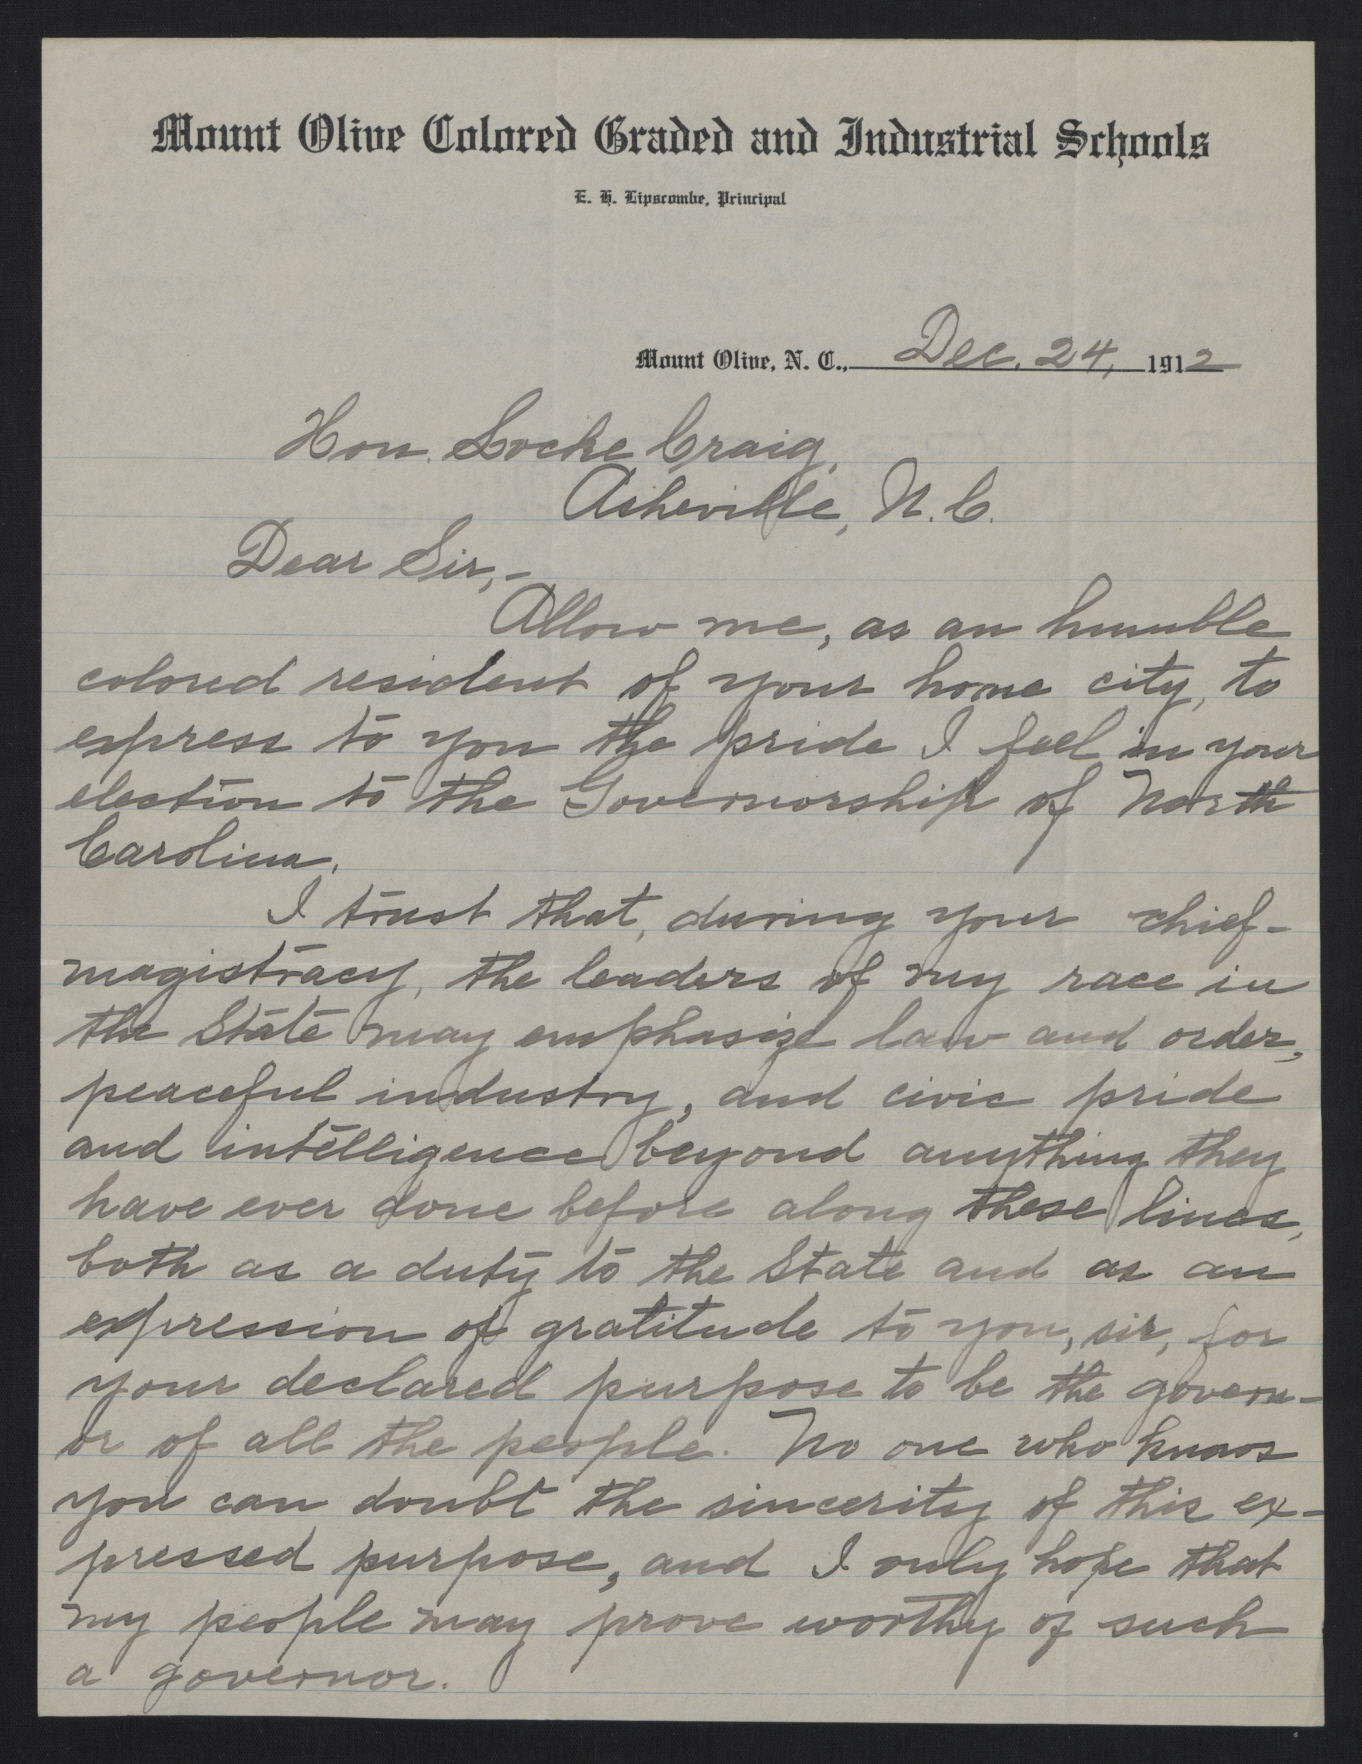 Letter from Lipscombe to Craig, December 24, 1912, page 1